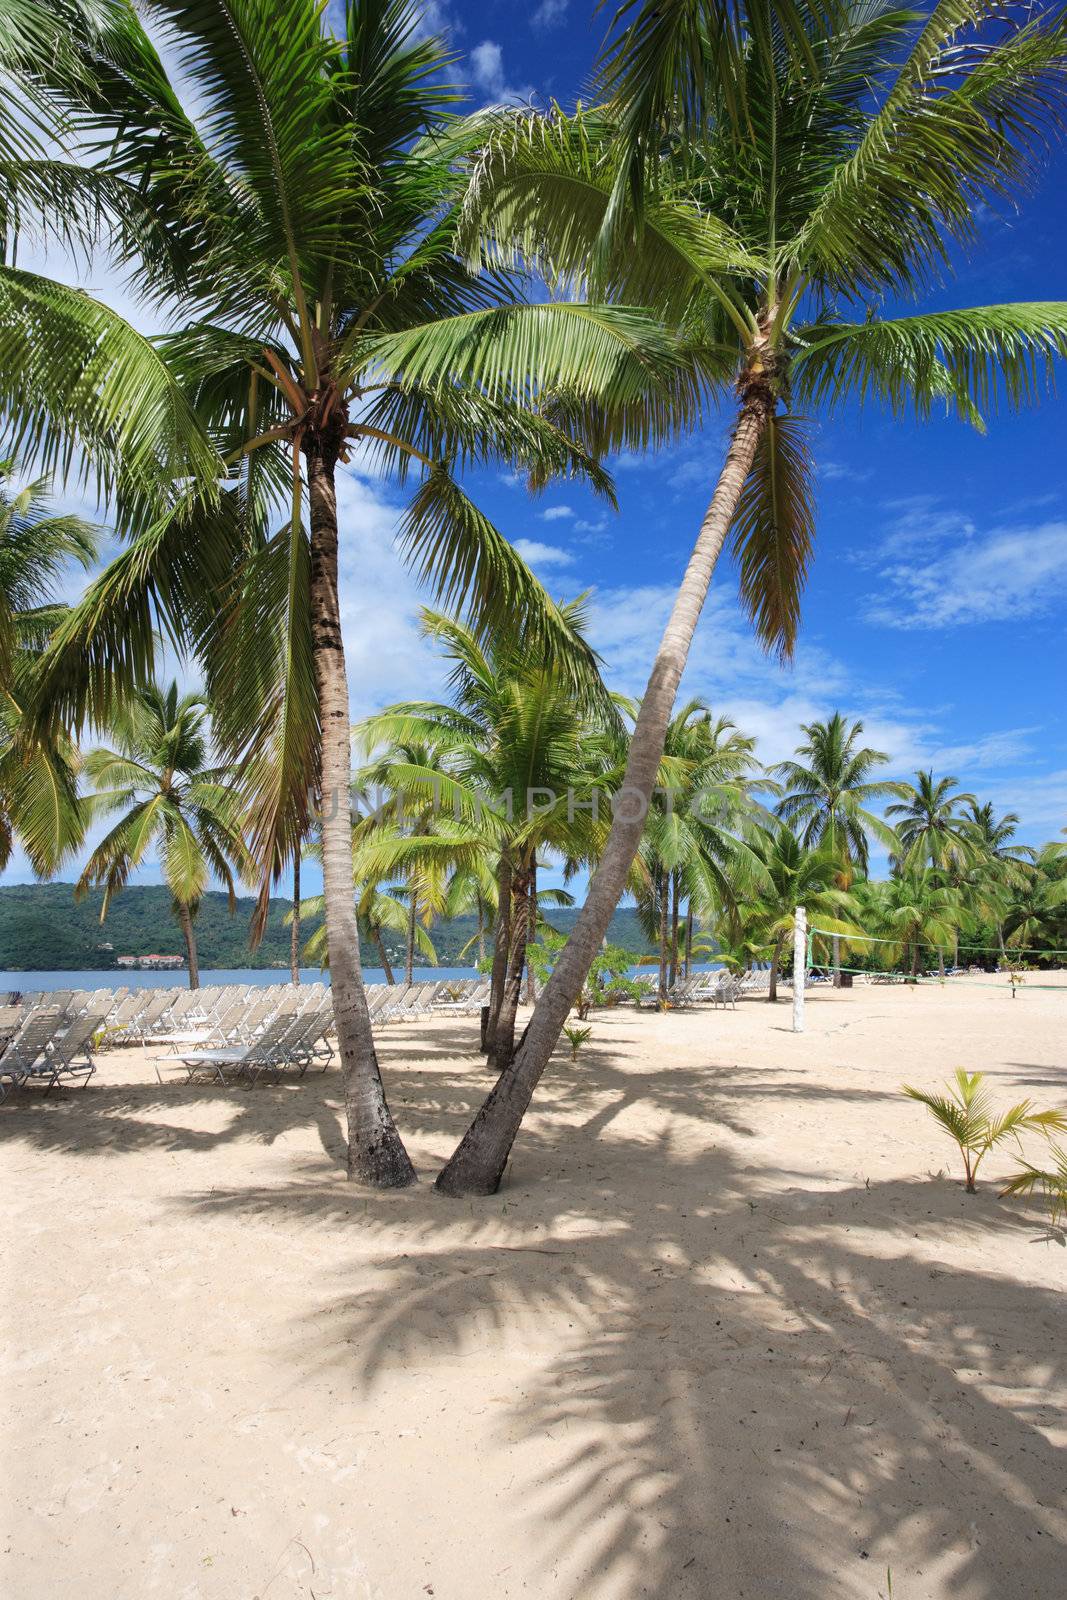 Photo of a beach with palm trees and beach chairs.